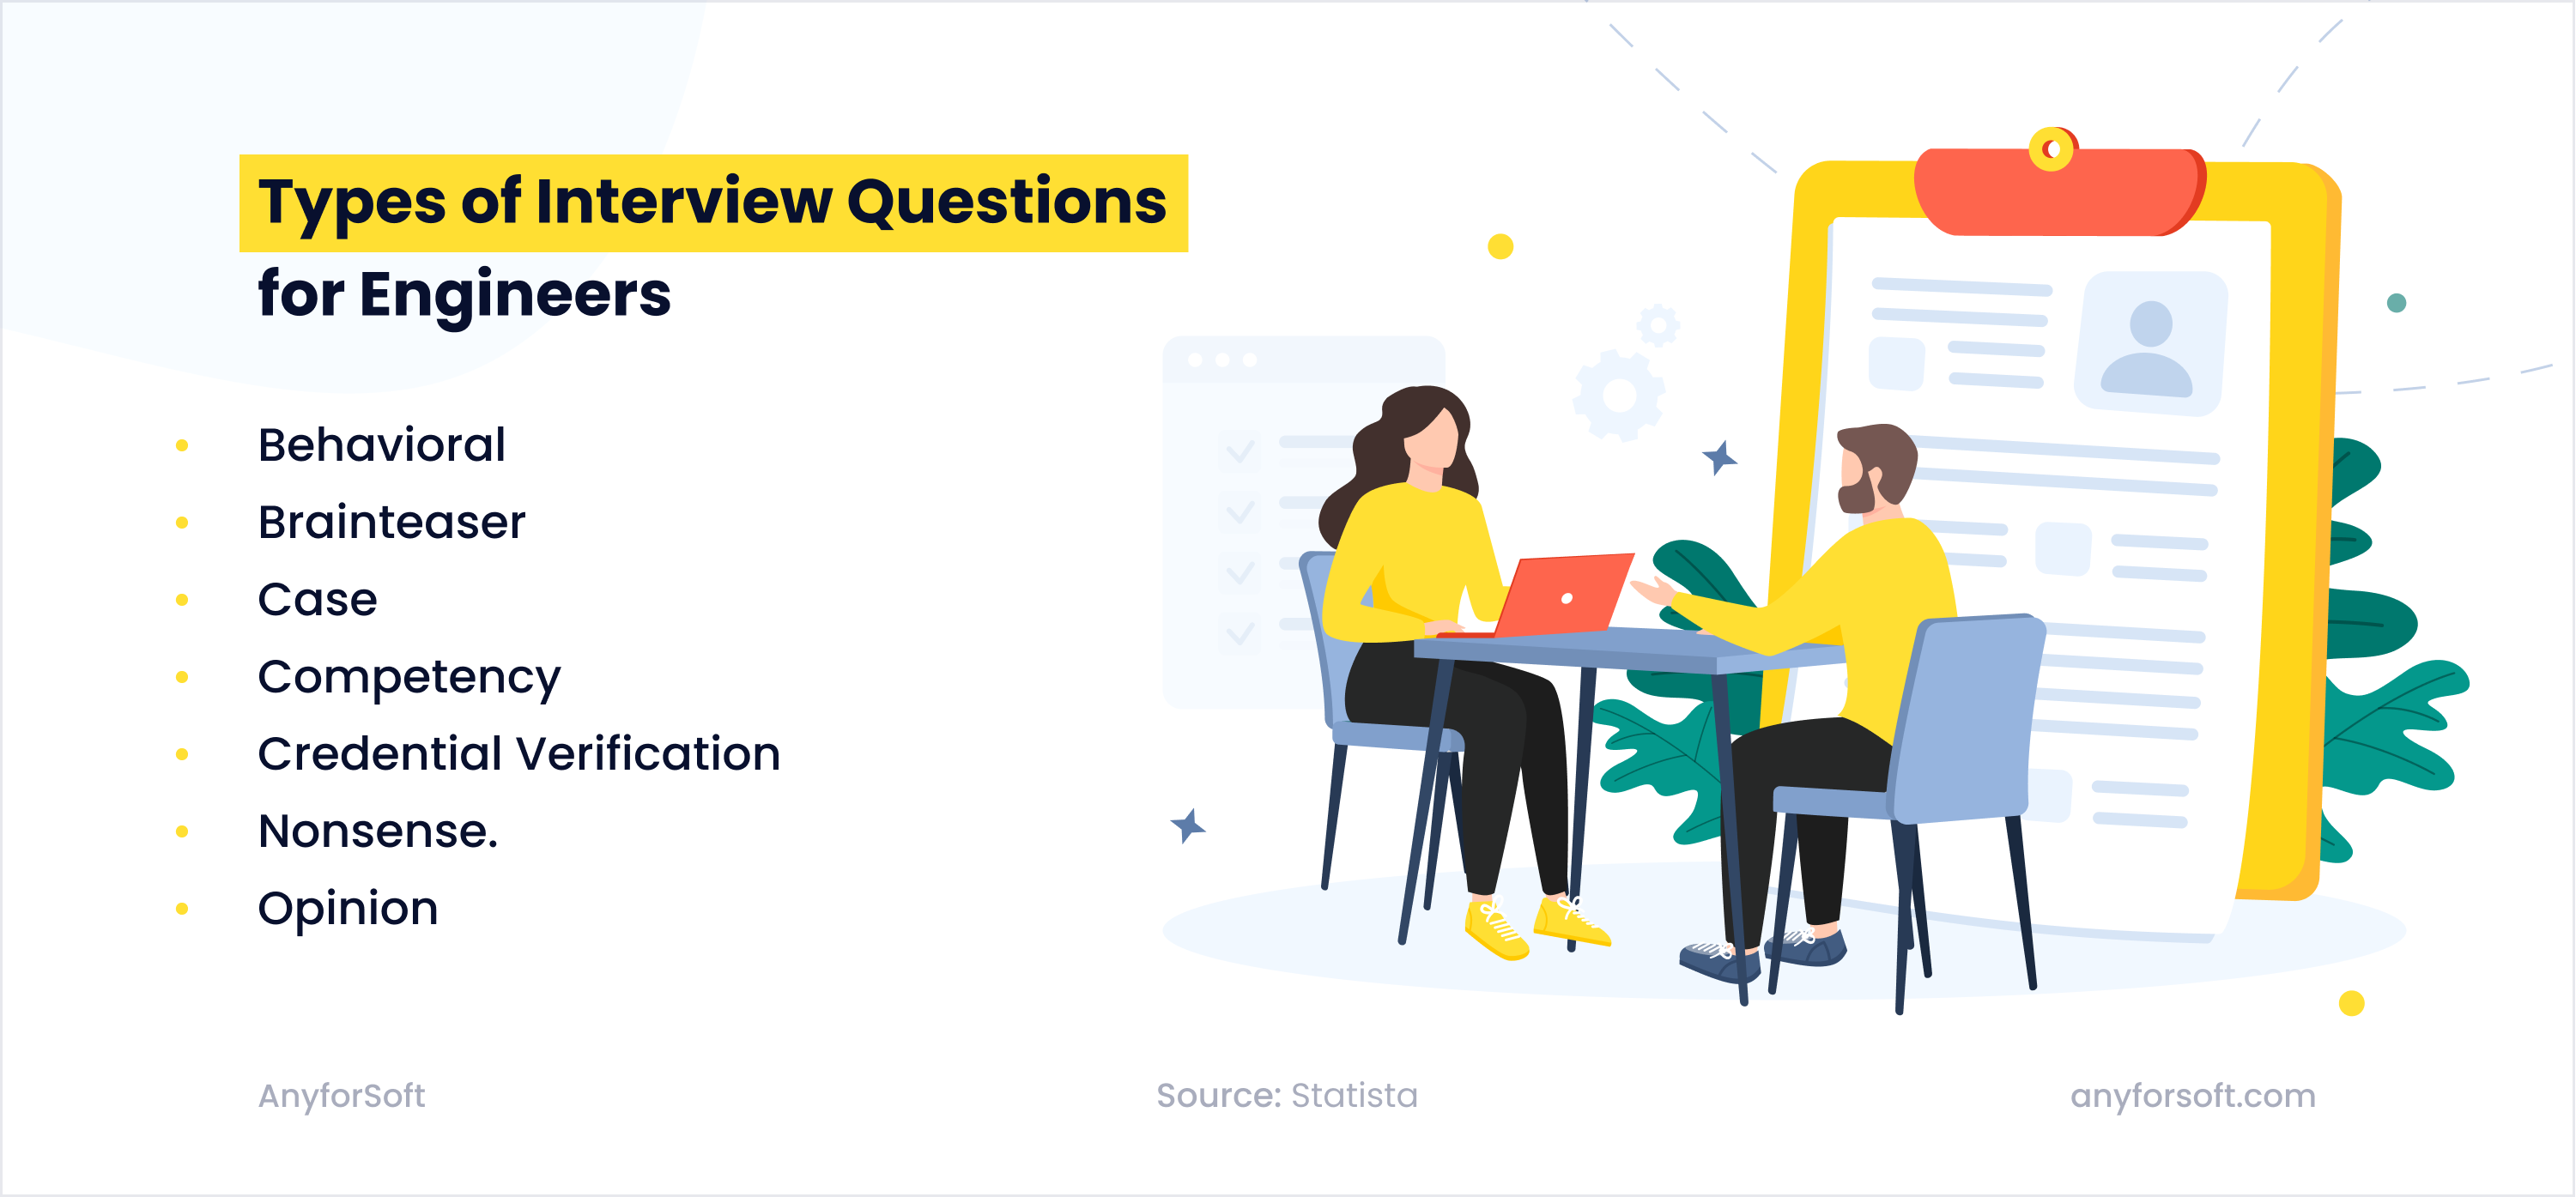 Types of Interview Questions for Engineers